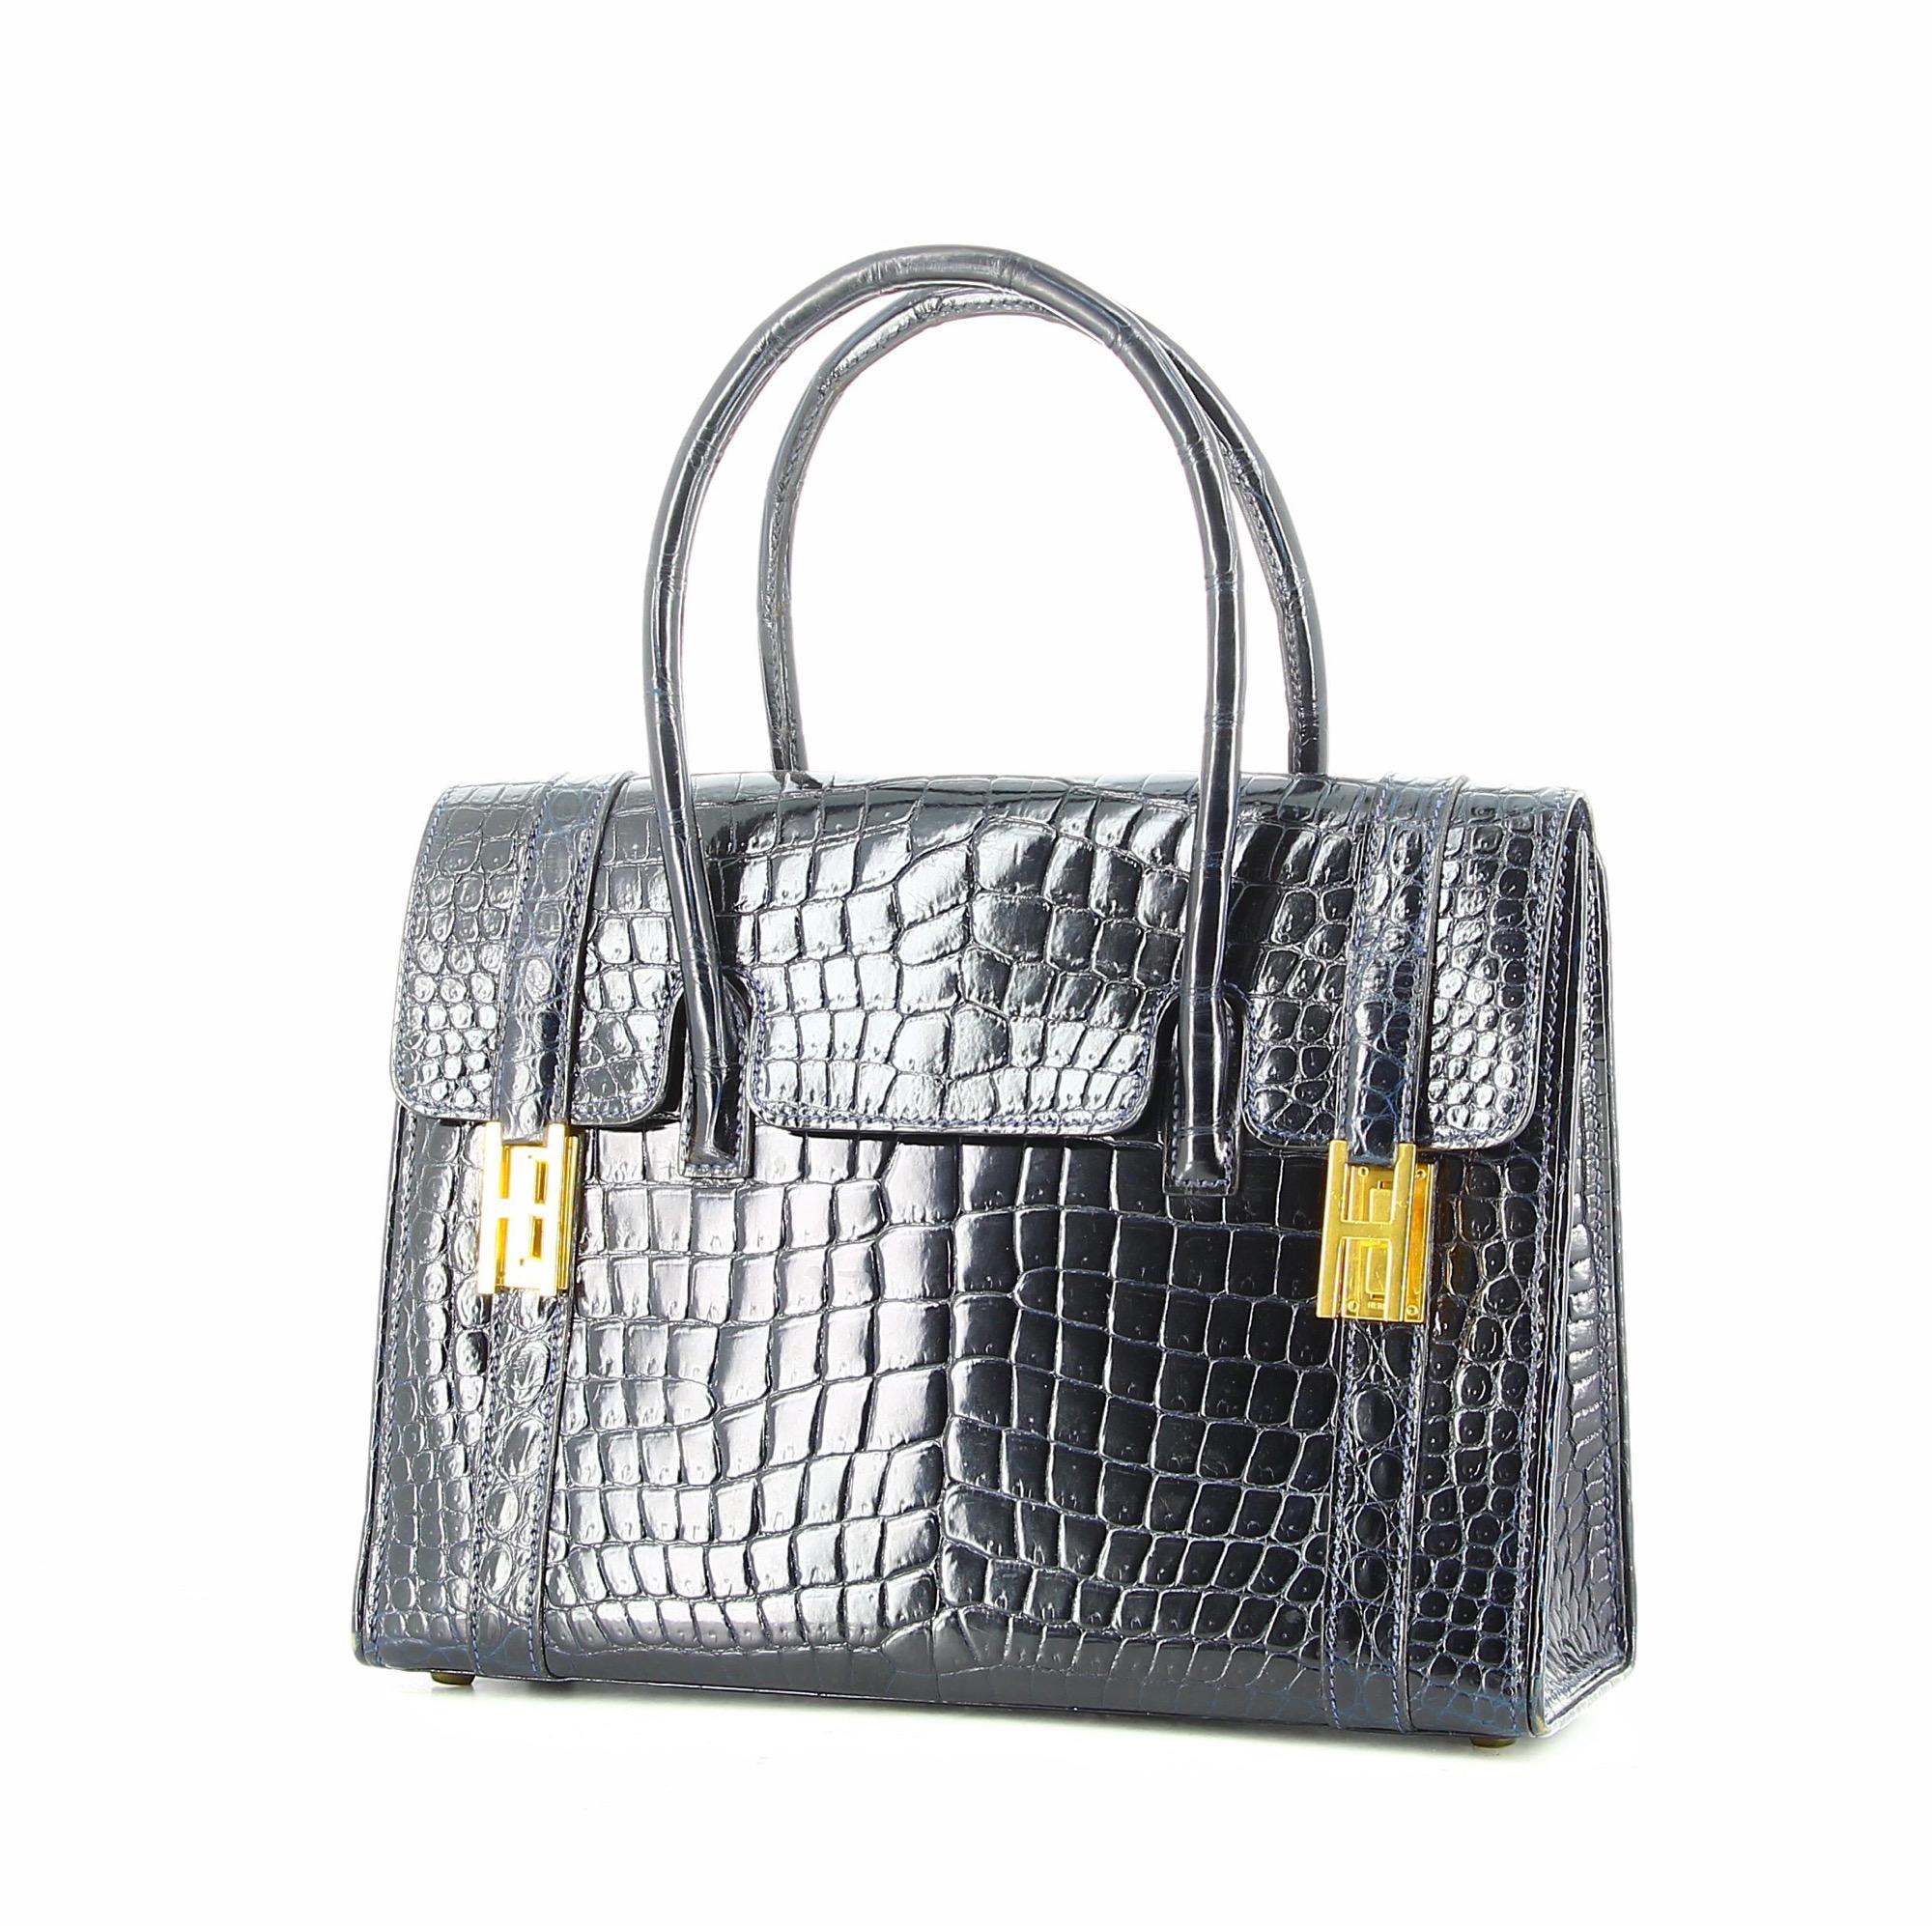 Hermès 60'S Drag Navy Croco Handbag
Stunning and hard to find Hermès Drag bag in navy croco leather.
Excellent condition for a 60 years old bag however one of the lock is a little bit loose.
Corner and leather in good condition